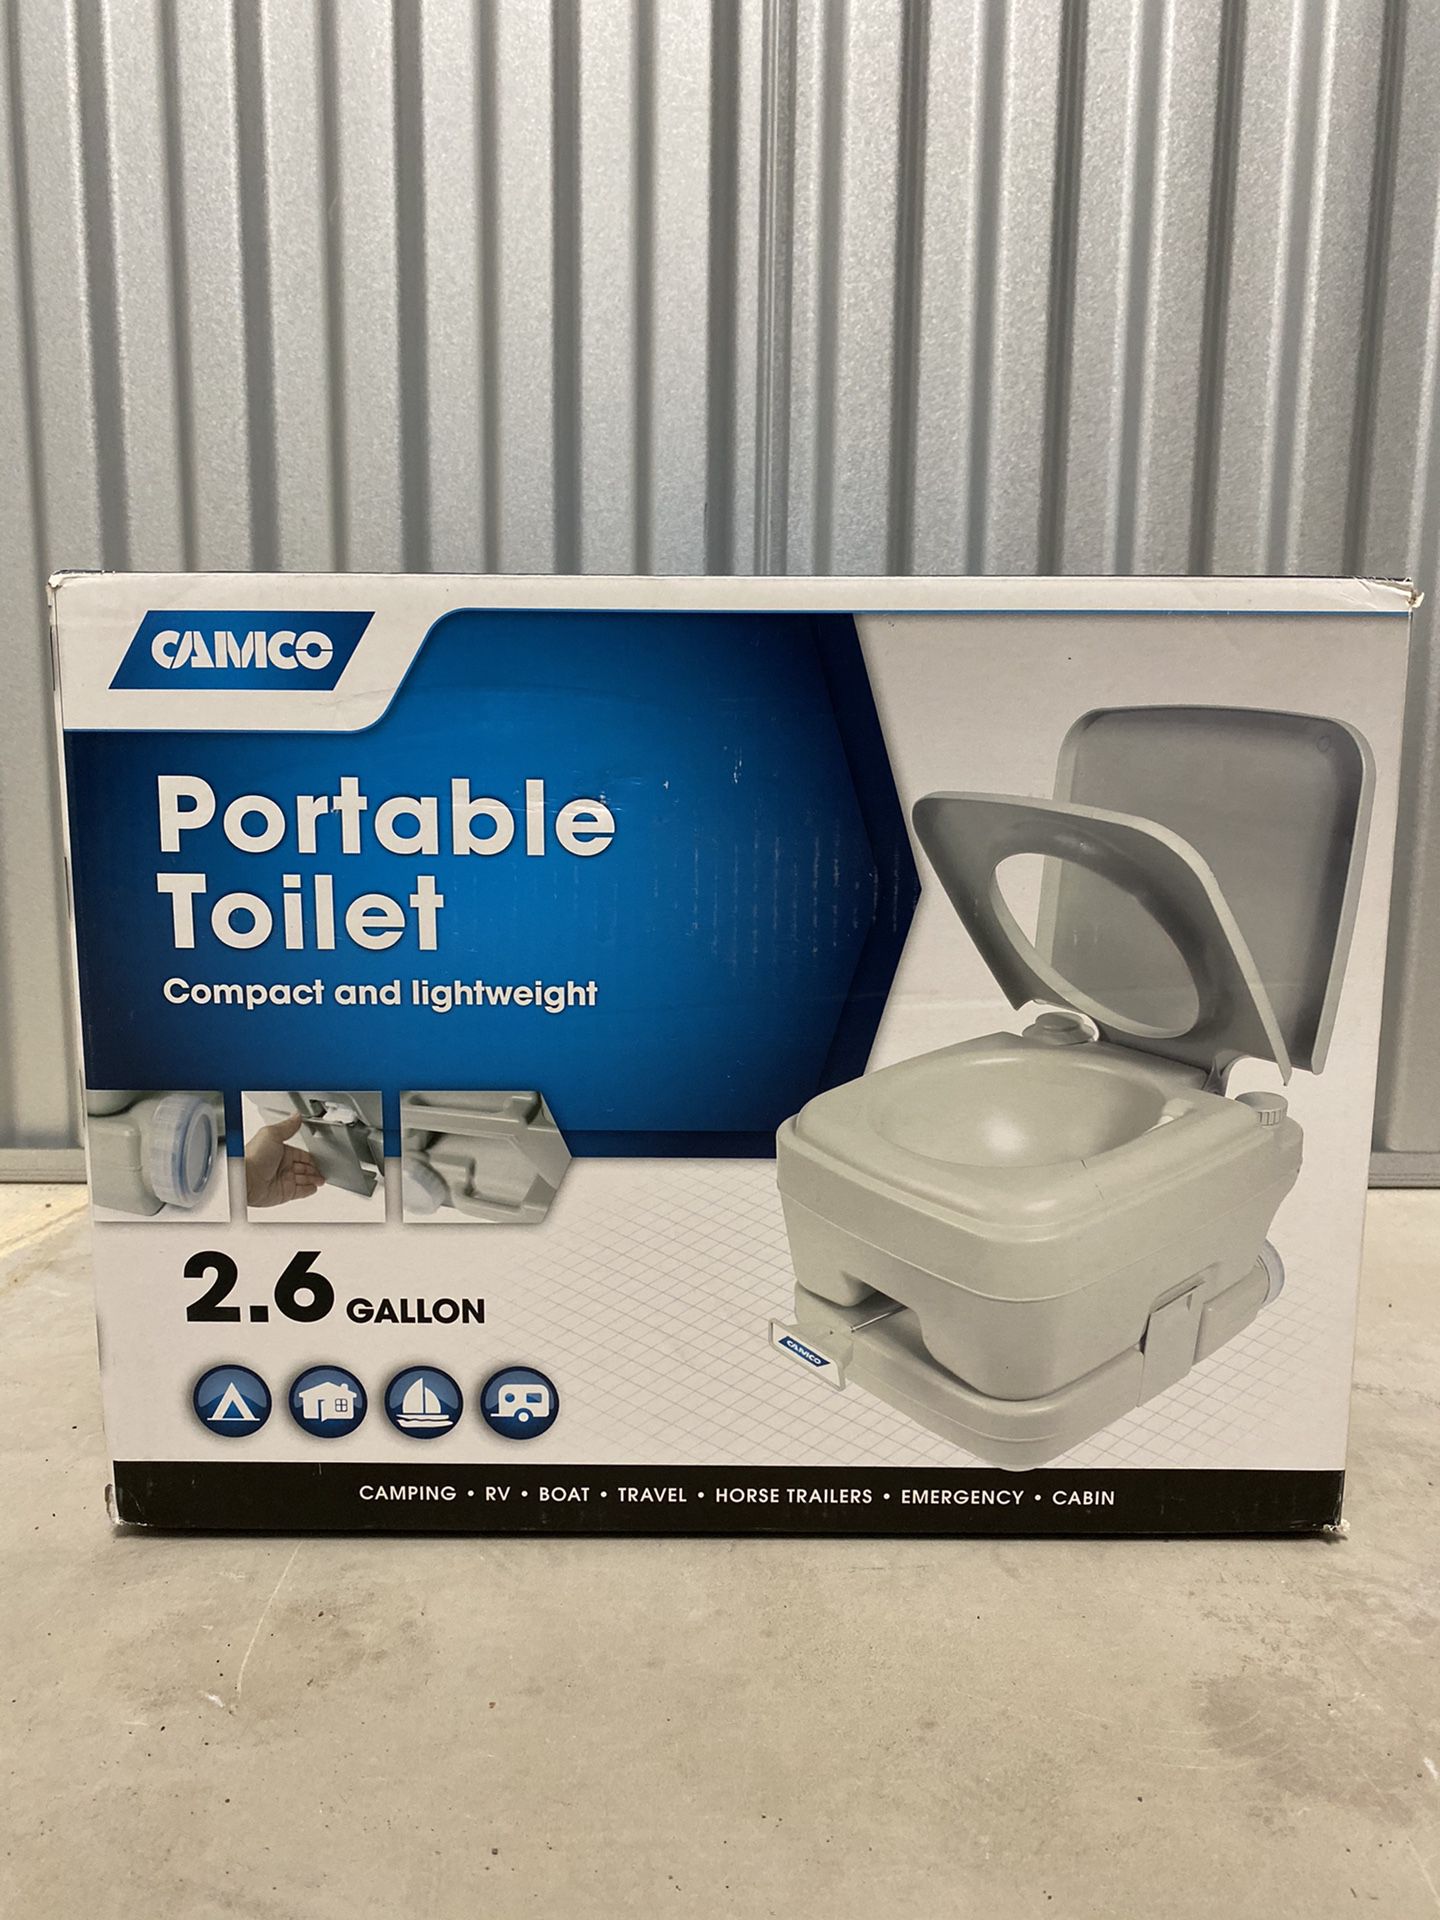 Camco Portable Toilet - New